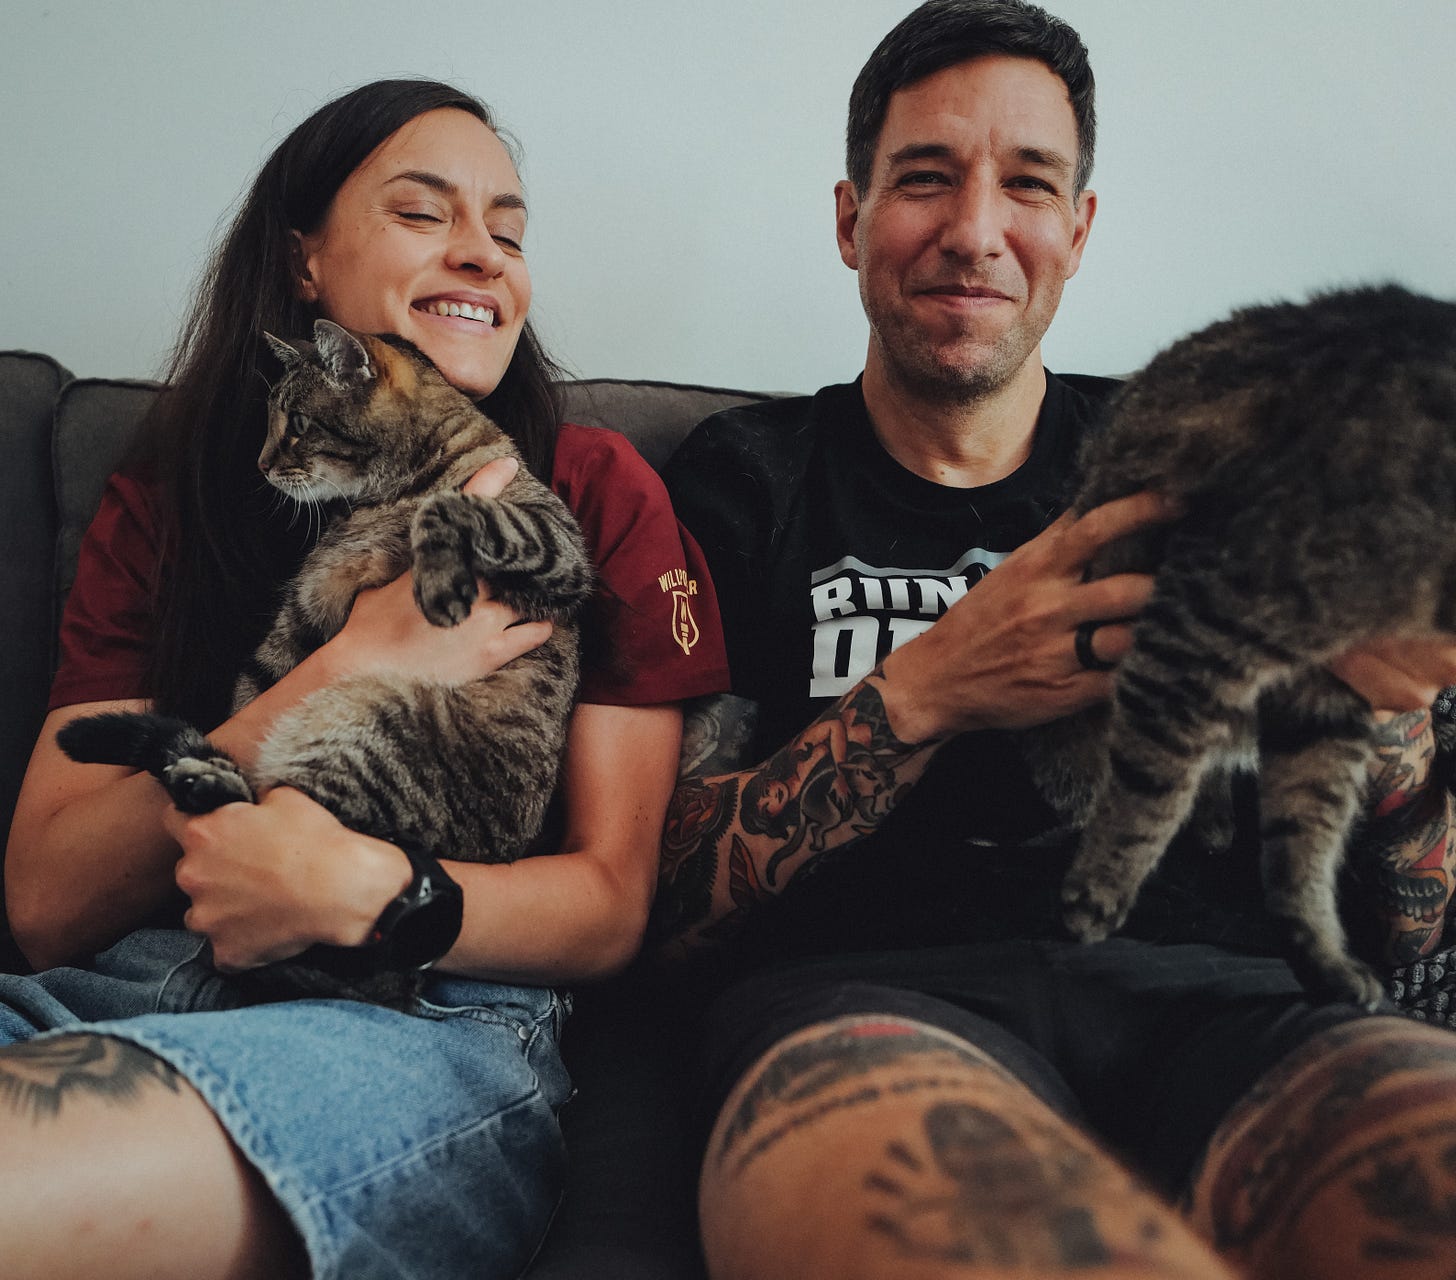 The Author with his wife and cats sitting on a couch